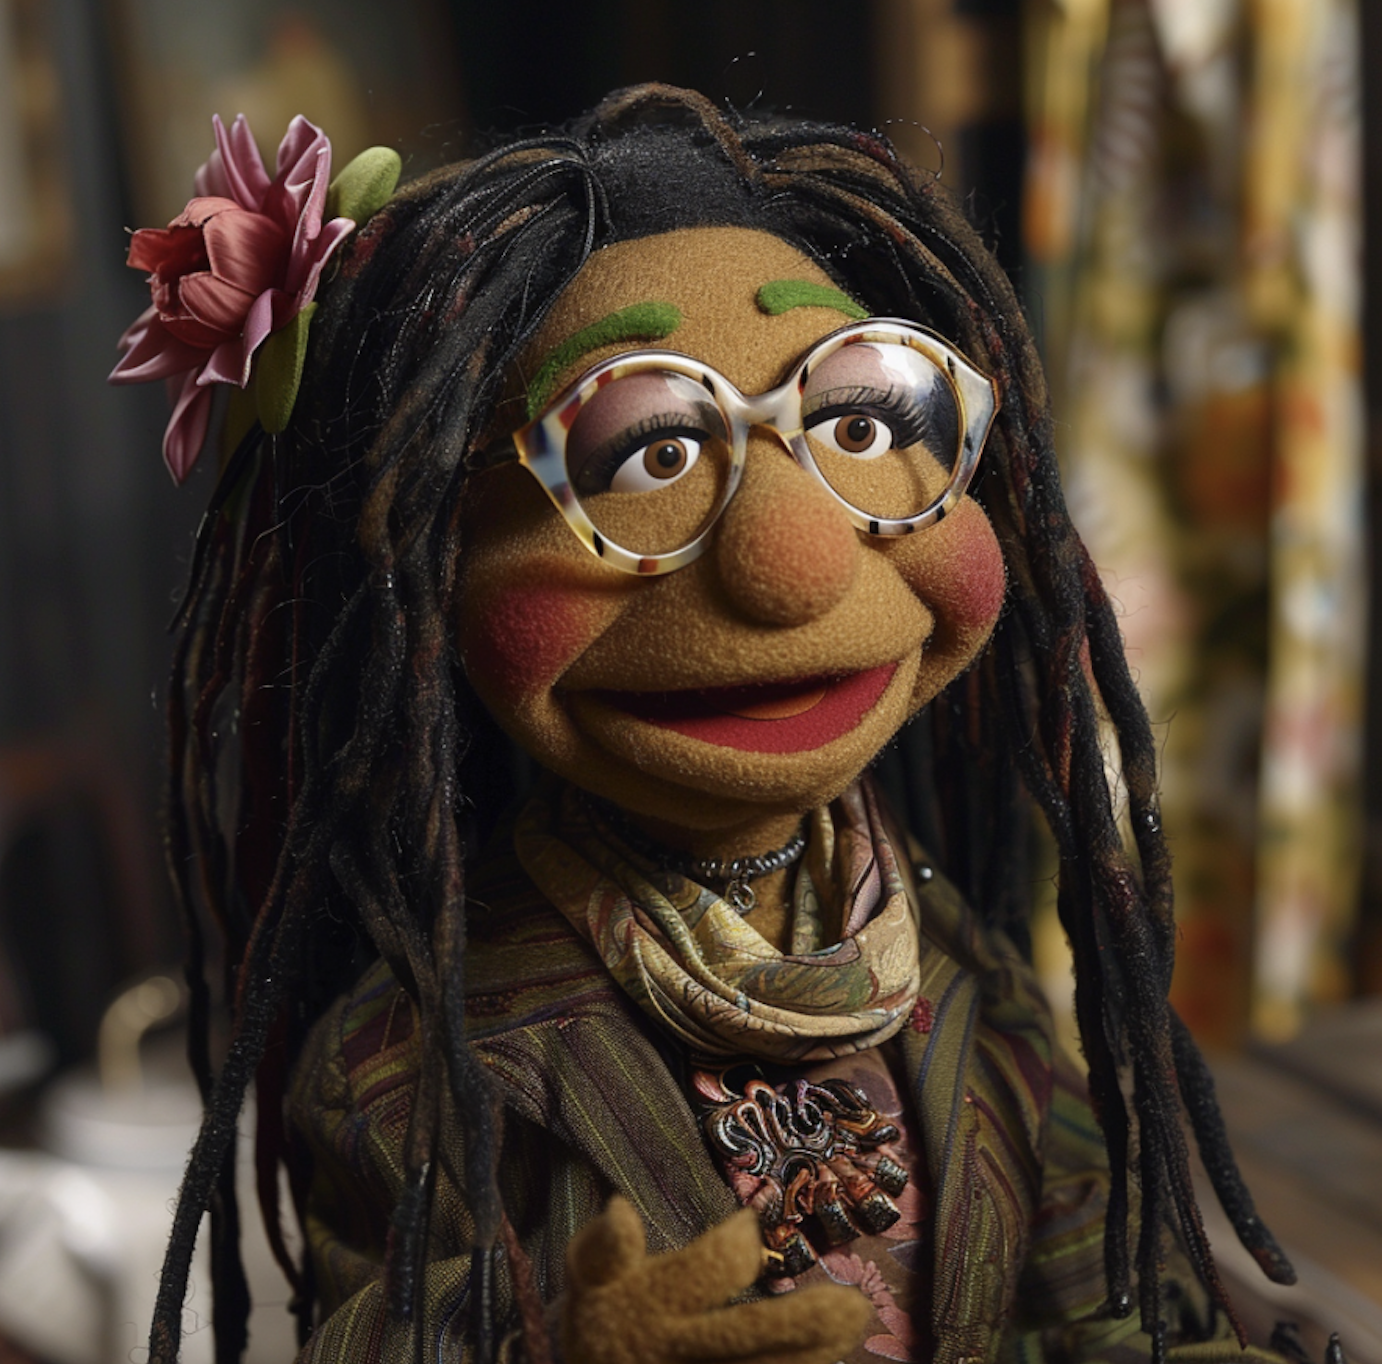 Whoopi as a Muppet, wearing glasses, a flower in her braids, and a stylish scarf